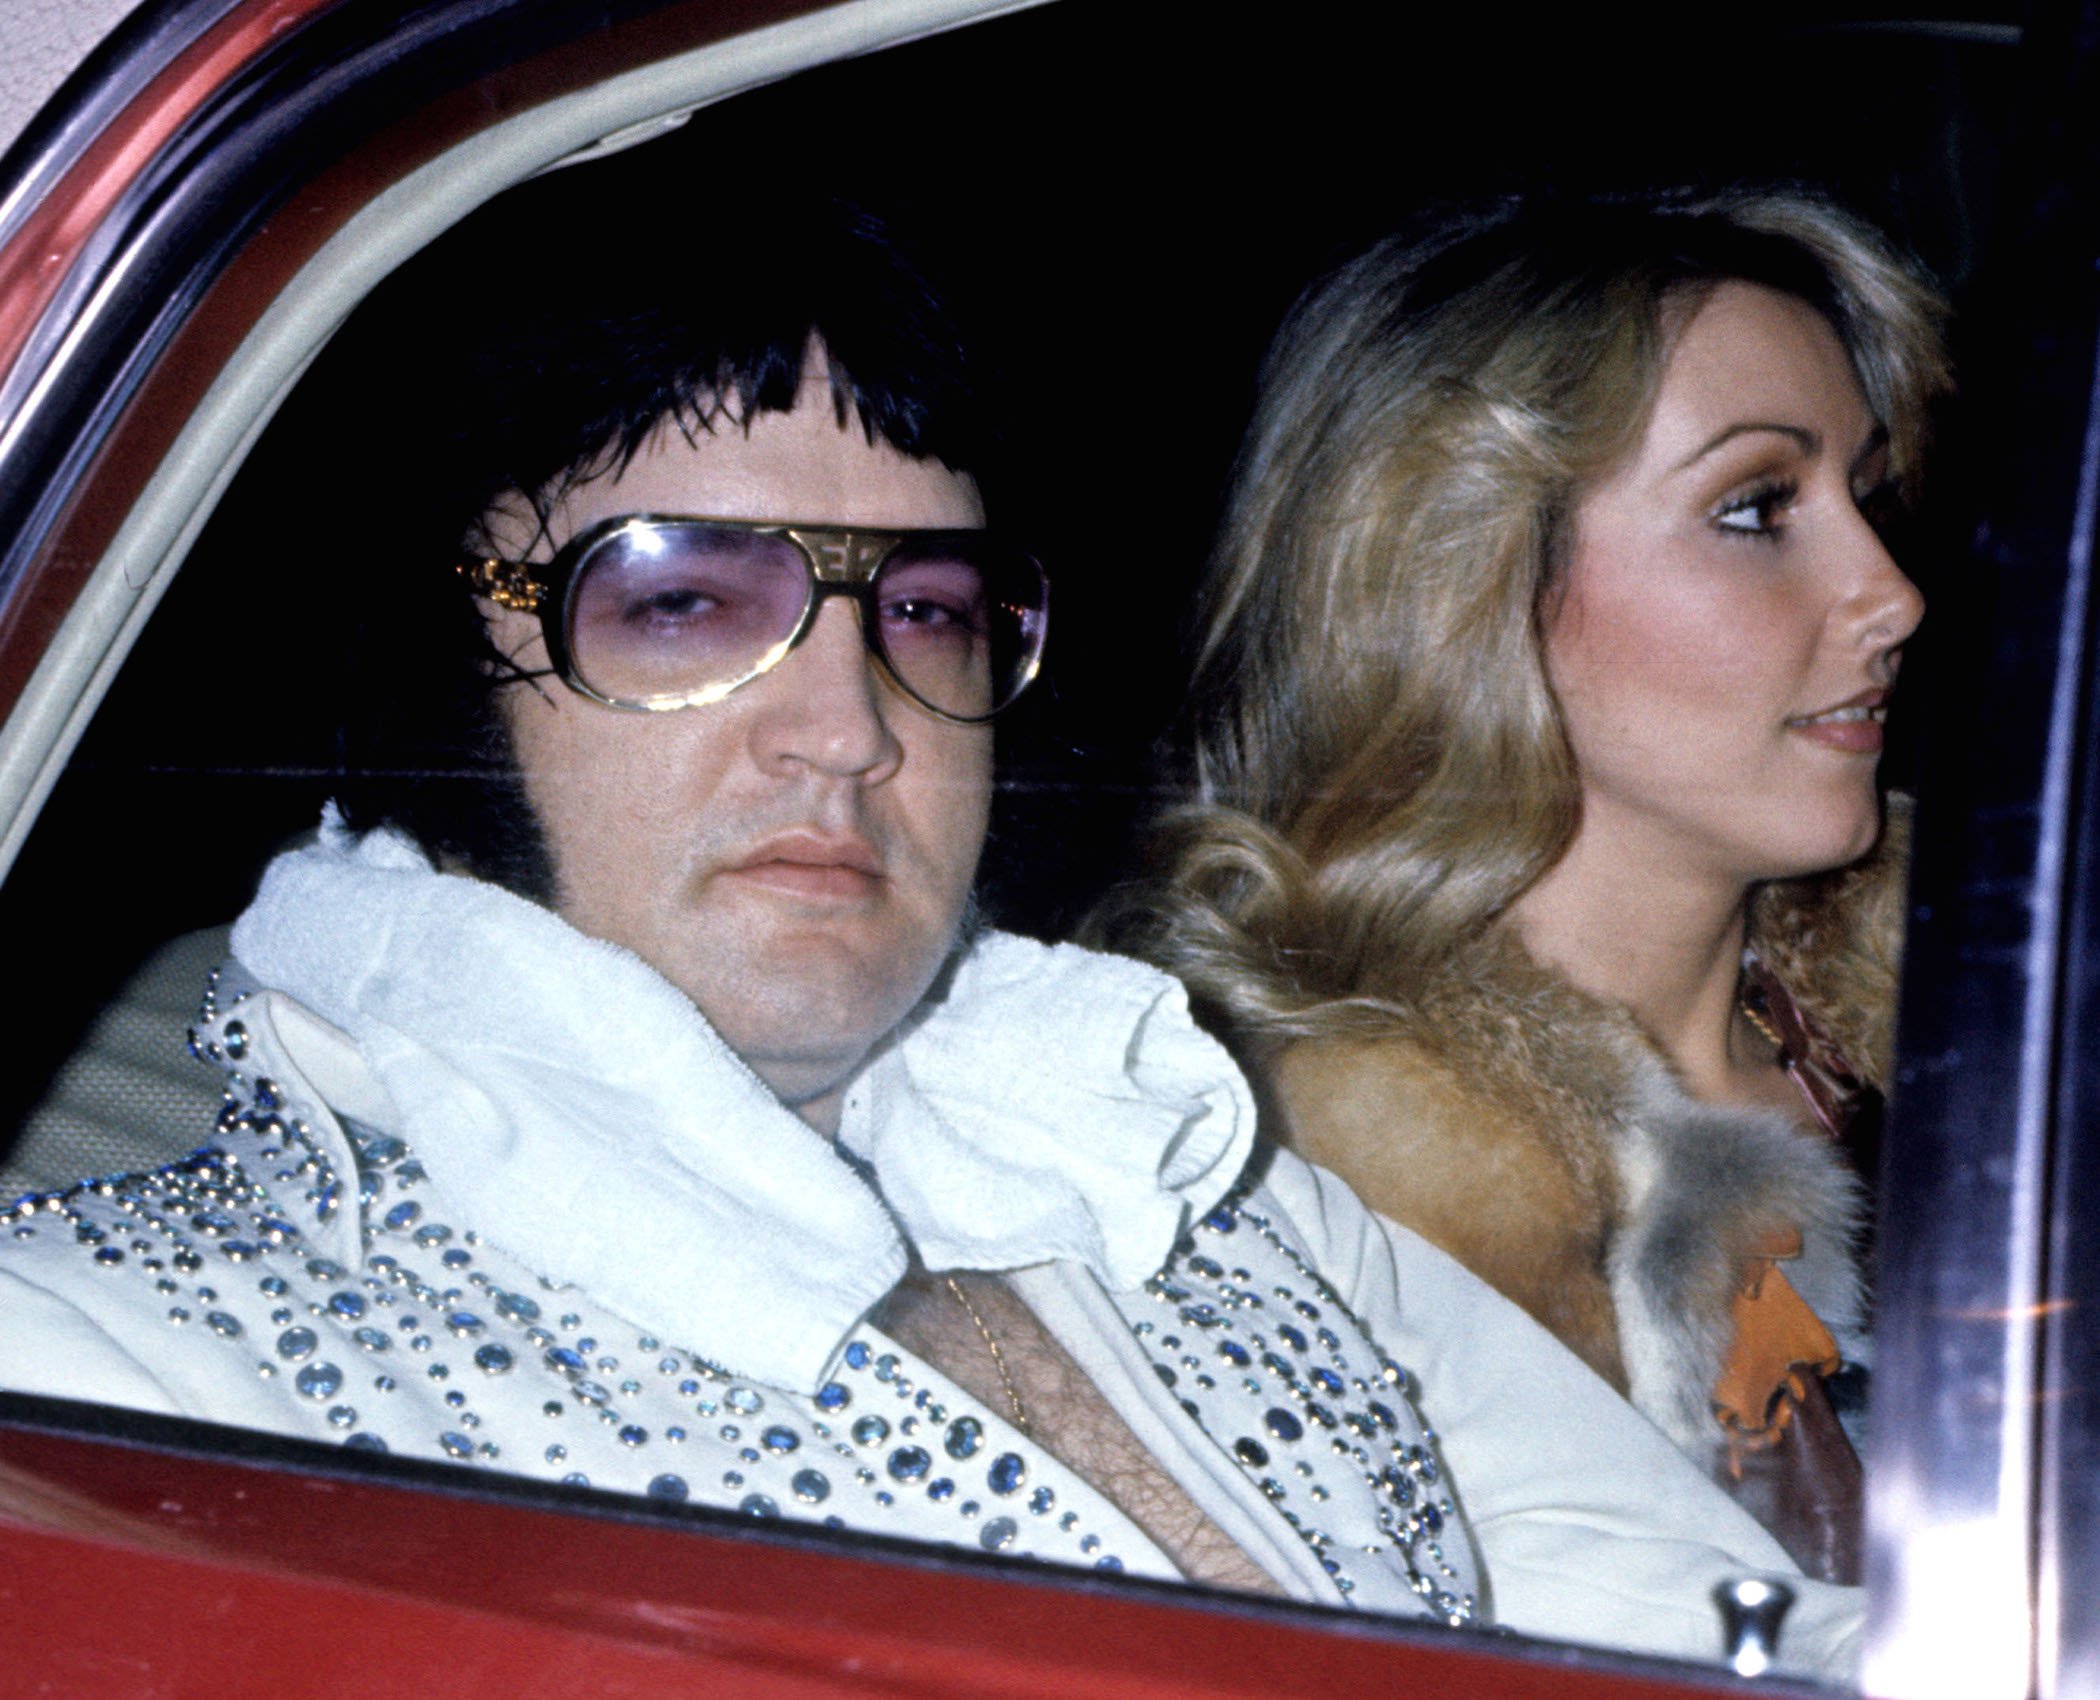 Elvis Presley with girlfriend Linda Thompson arriving at the Hilton Hotel